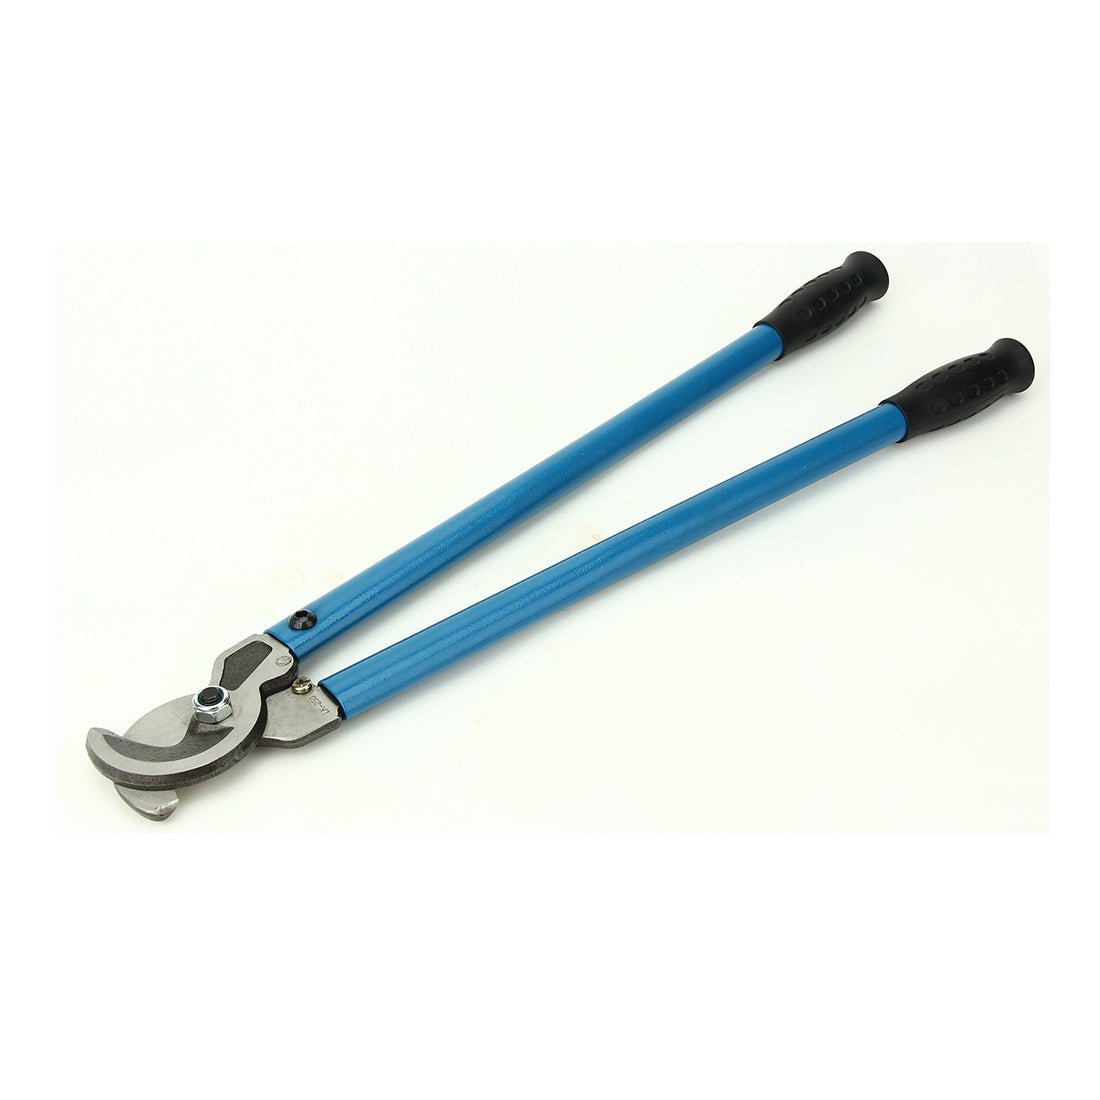 LK Series Cable Cutter Multi-Functional Powerful Wire Cutting Heavy Duty Hand Tool 120mm2 - JIVTO